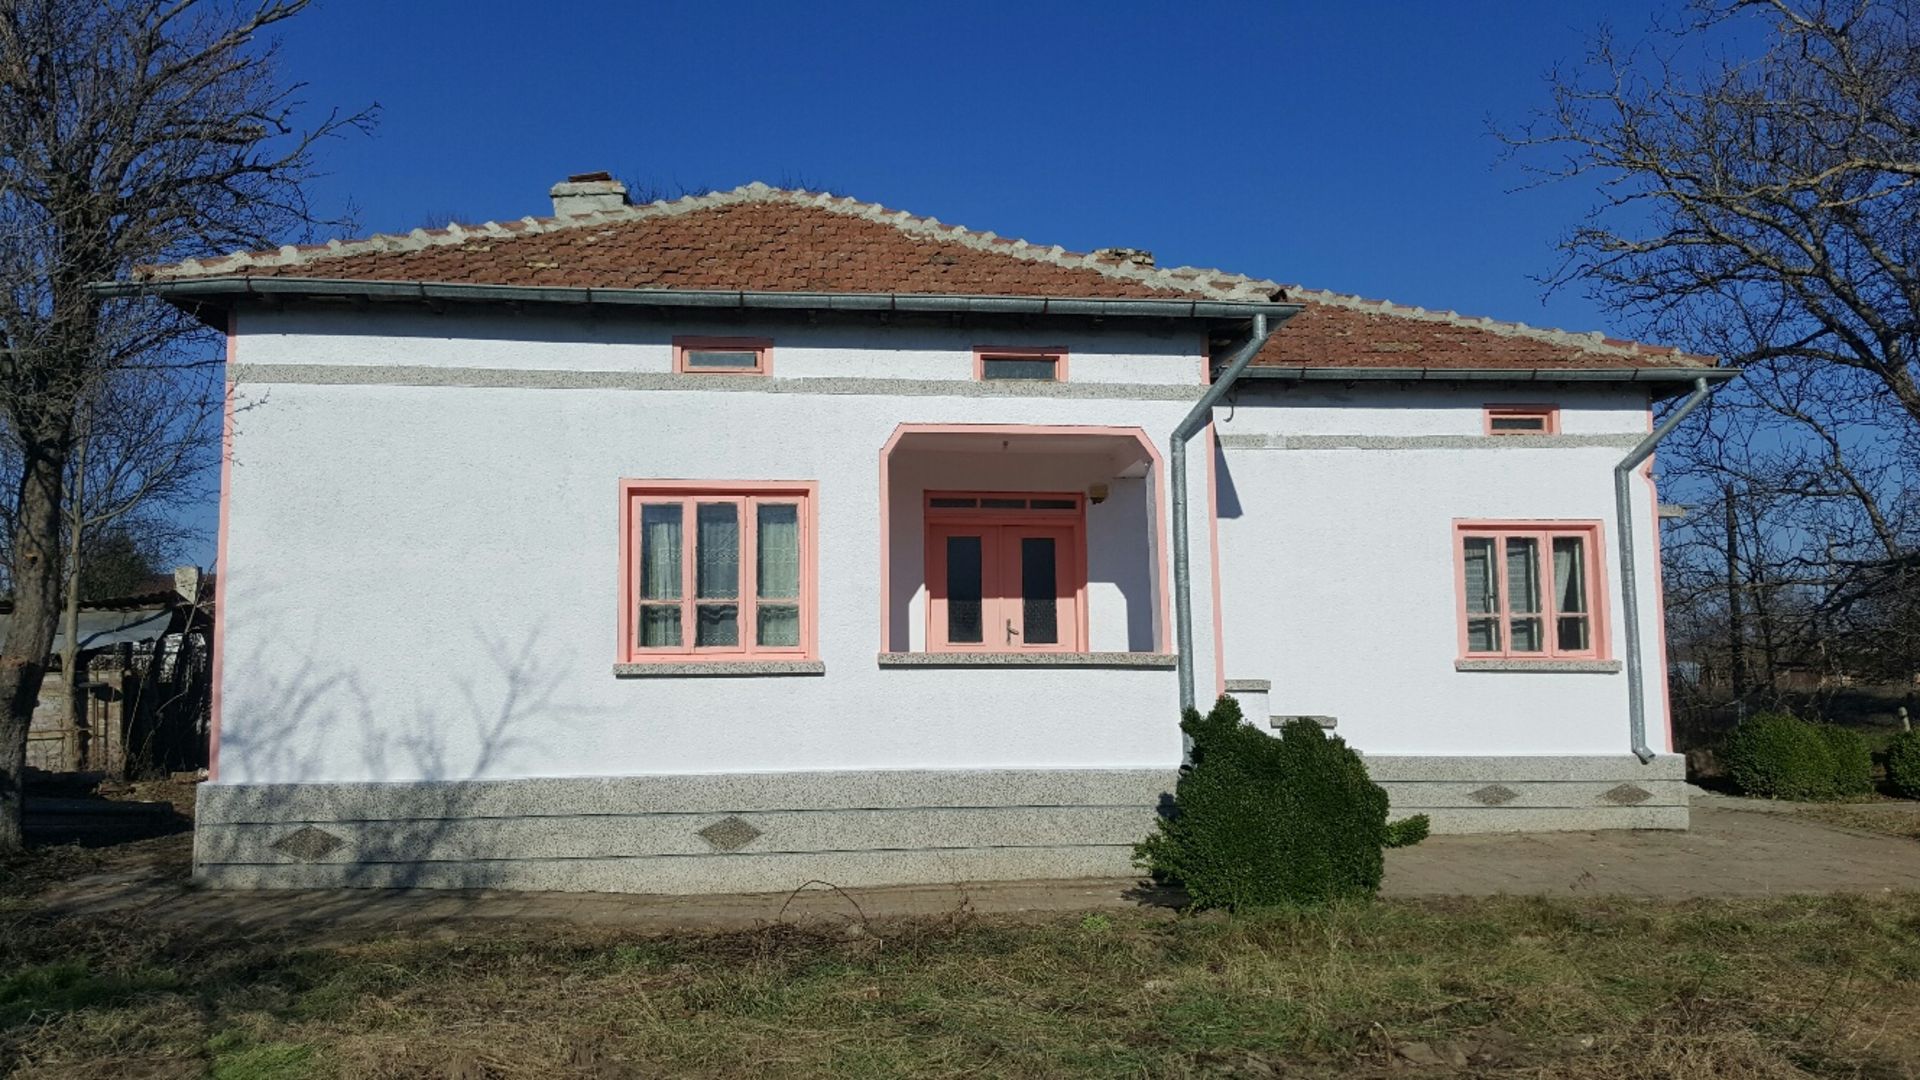 Ready to move into 5 room Bulgarian cottage for sale. With land not far from coast - Image 6 of 42